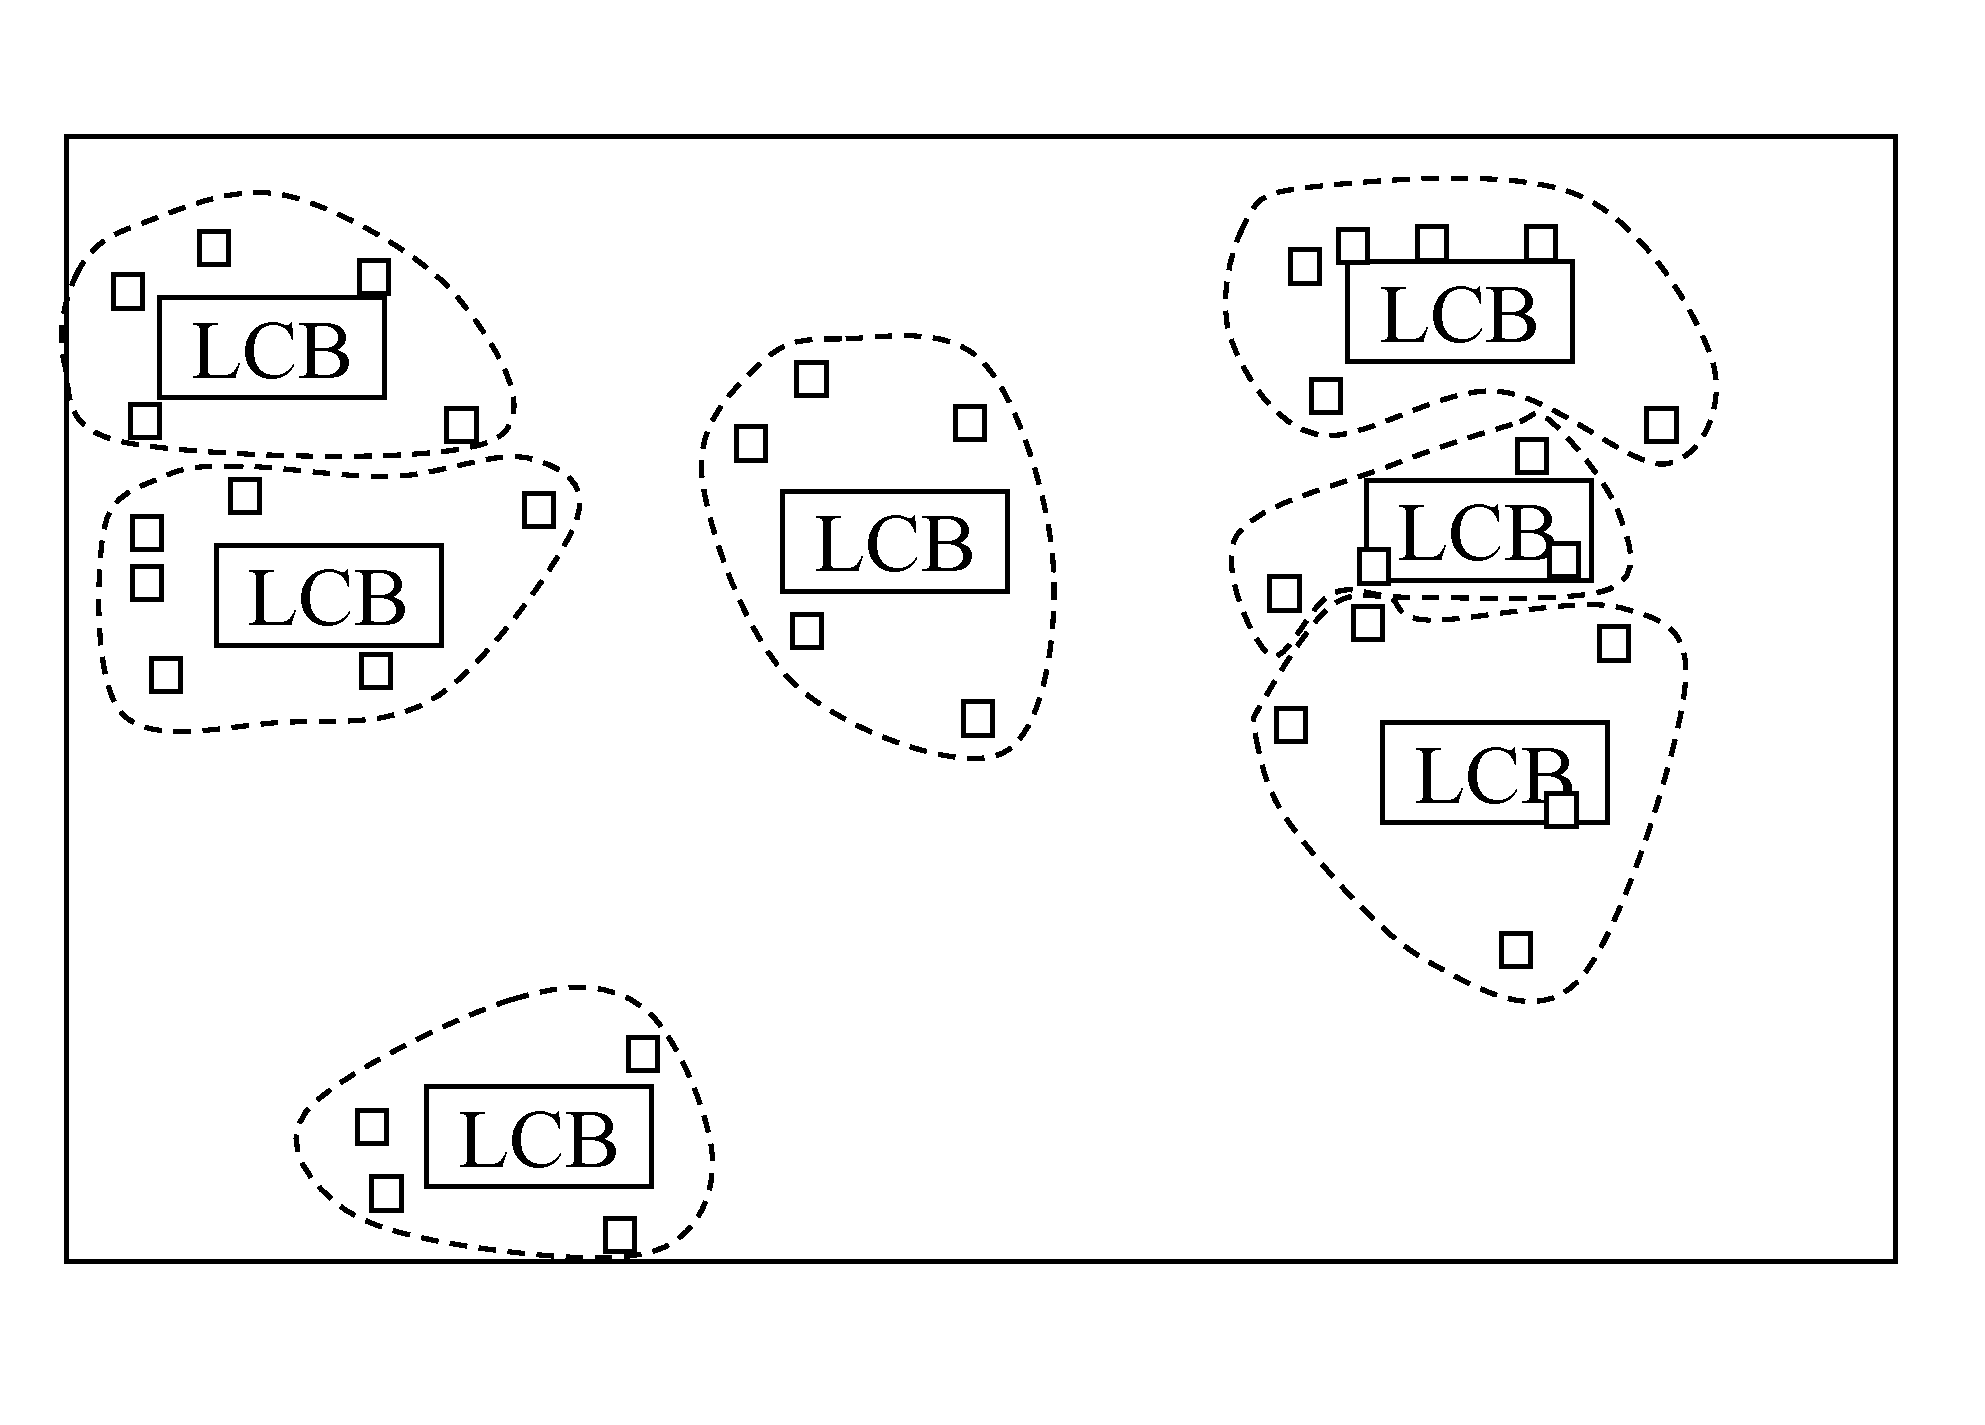 Regular local clock buffer placement and latch clustering by iterative optimization